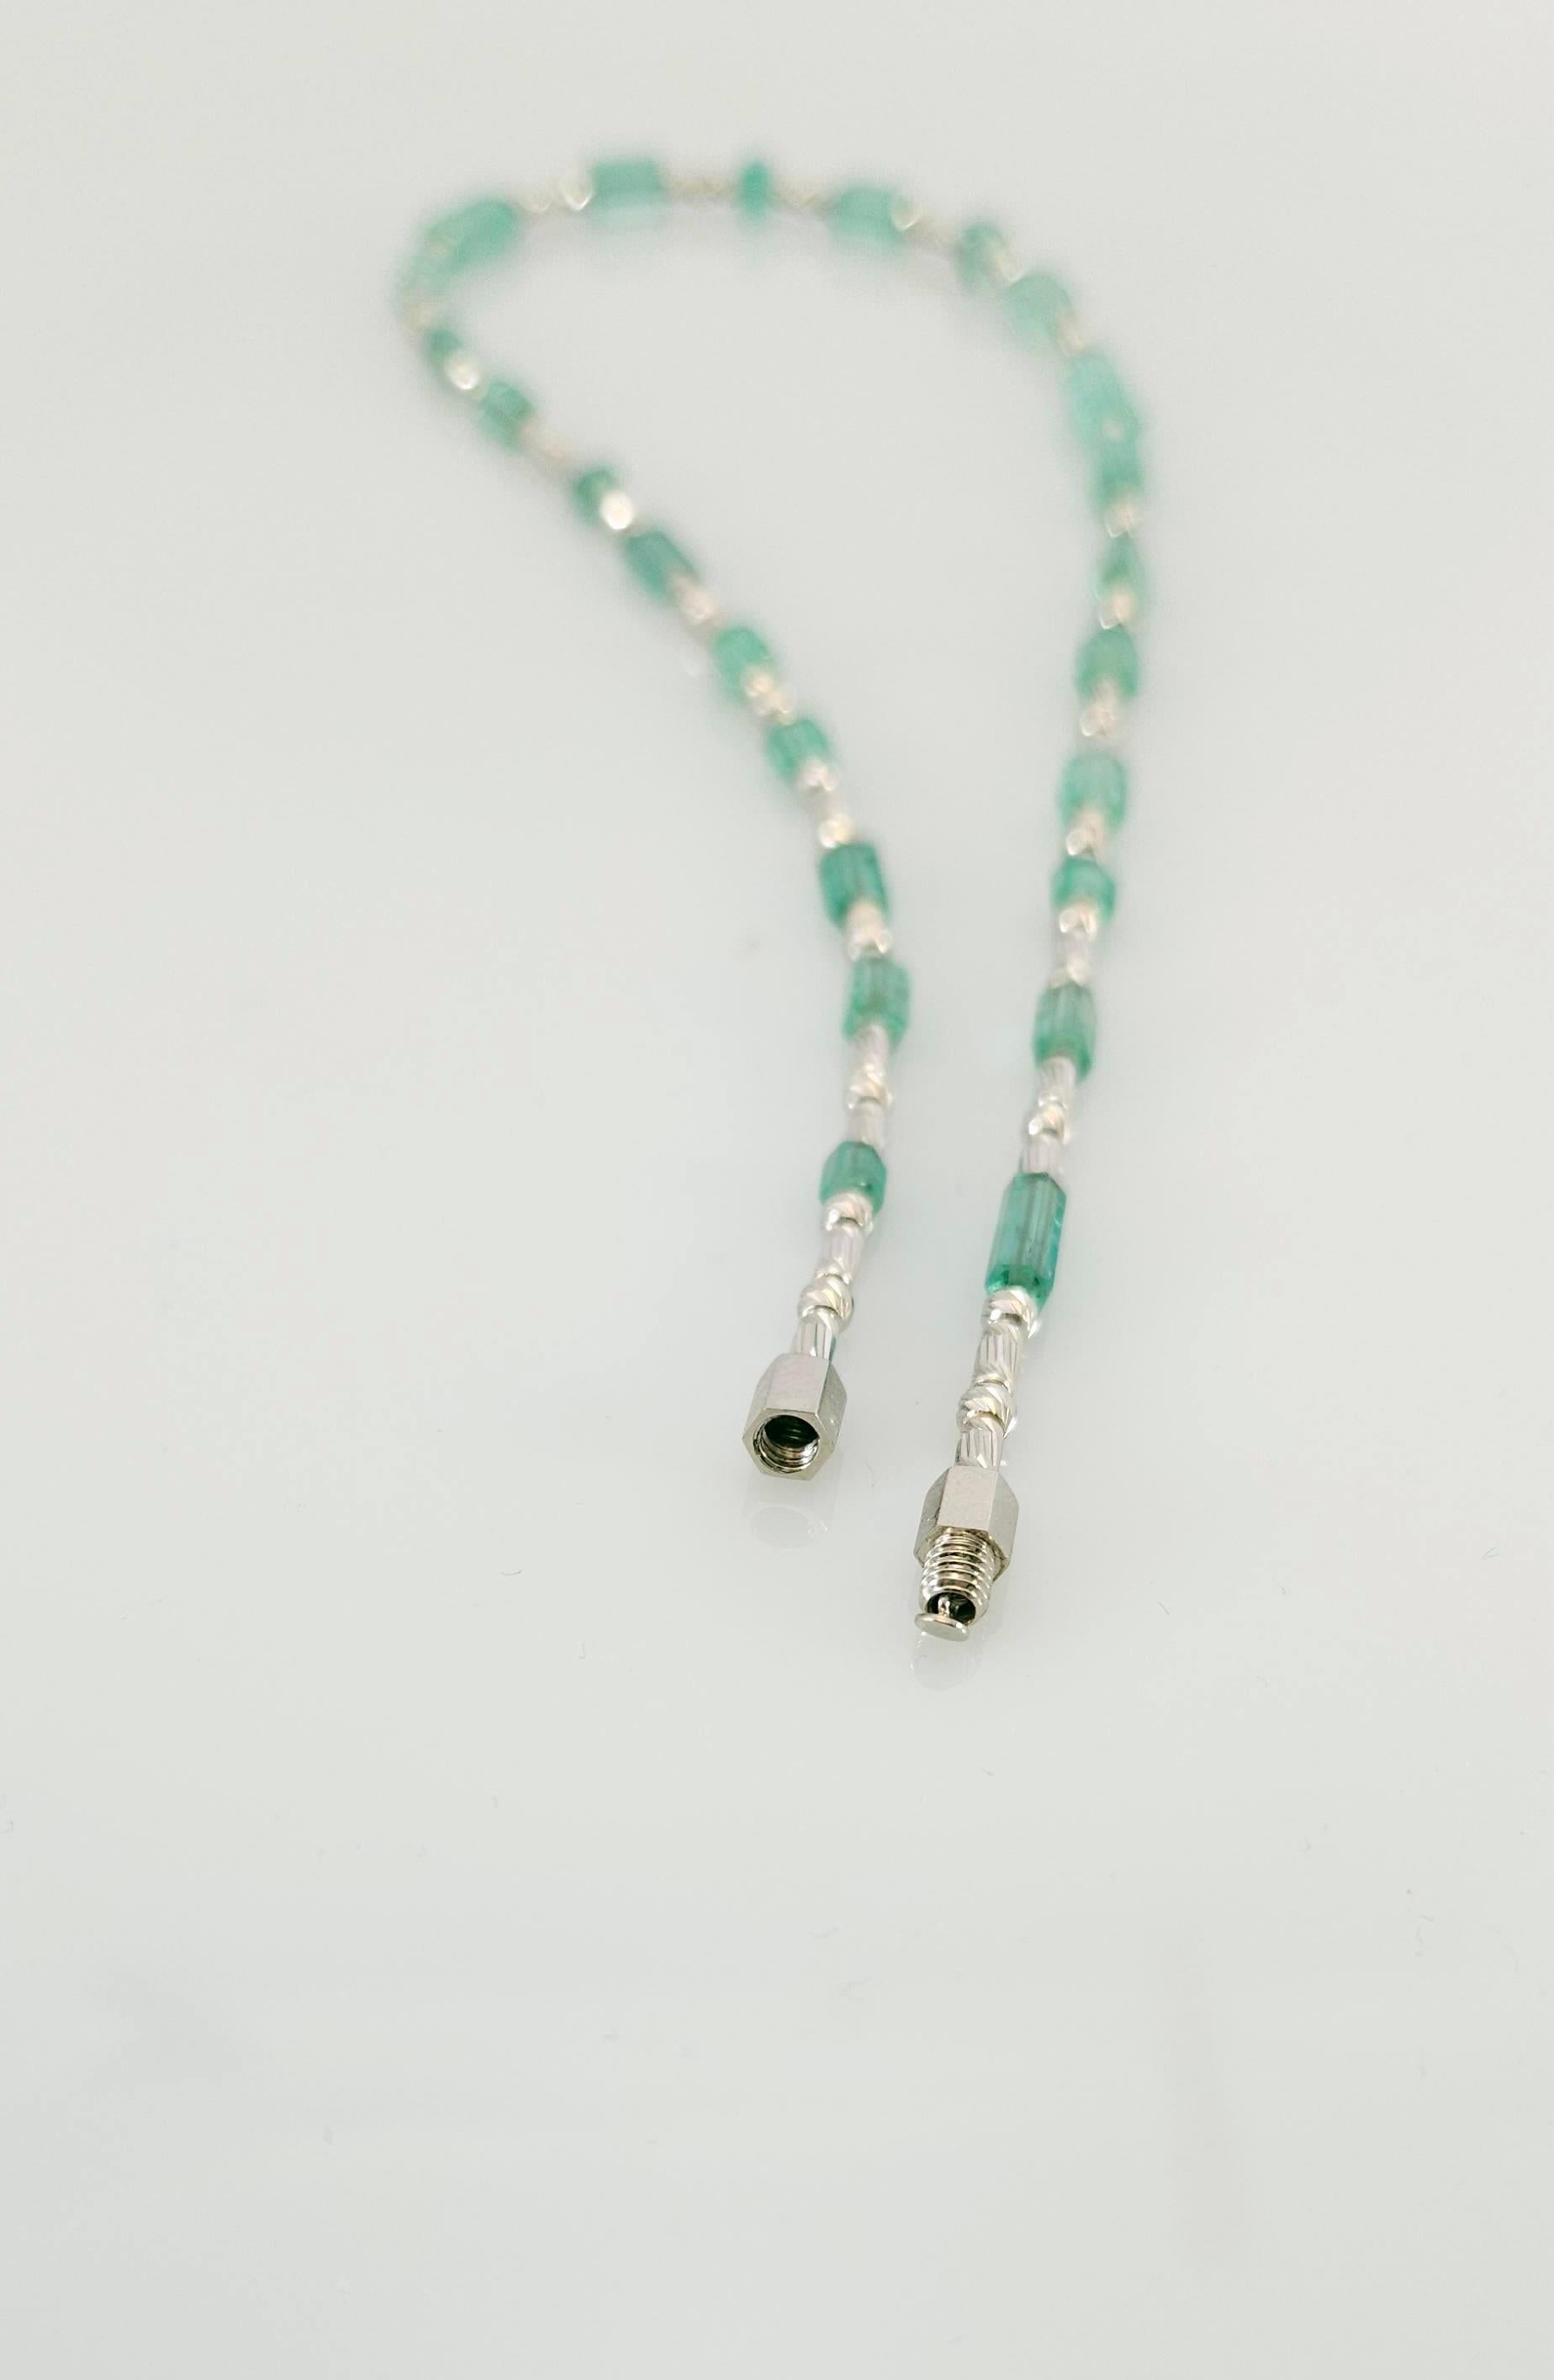 Natural Emerald Crystal Bead Necklace with 18 Carat White Gold For Sale 5